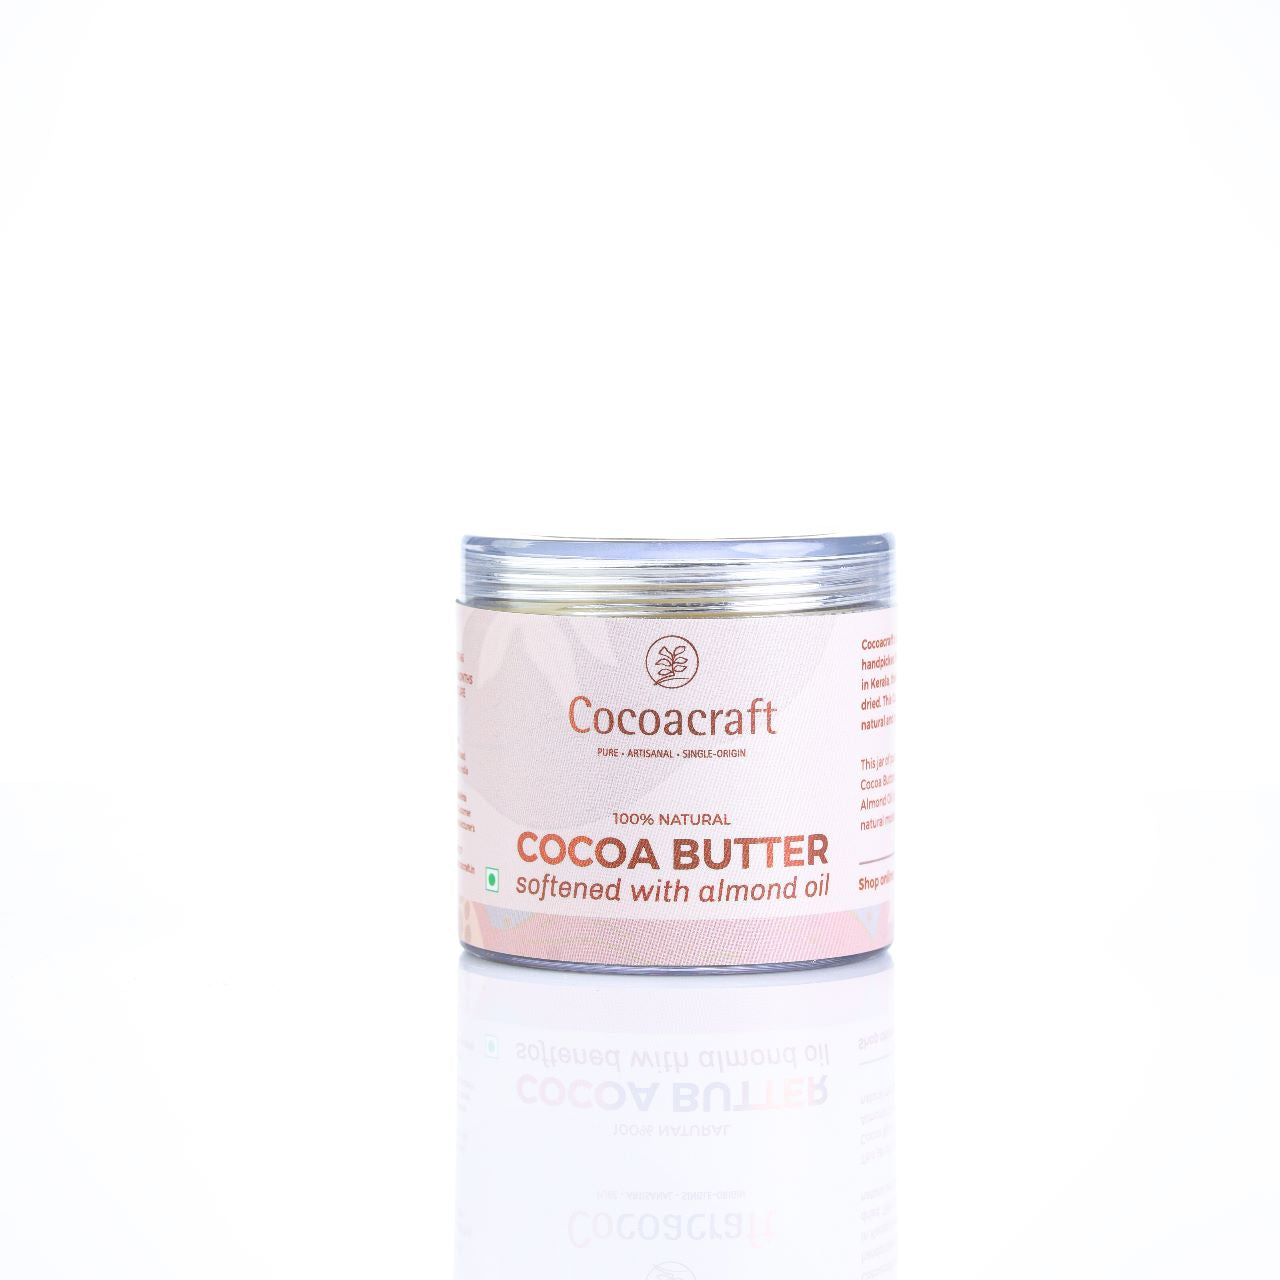 COCOA BUTTER SOFTENED WITH ALMOND OIL (For Skin)